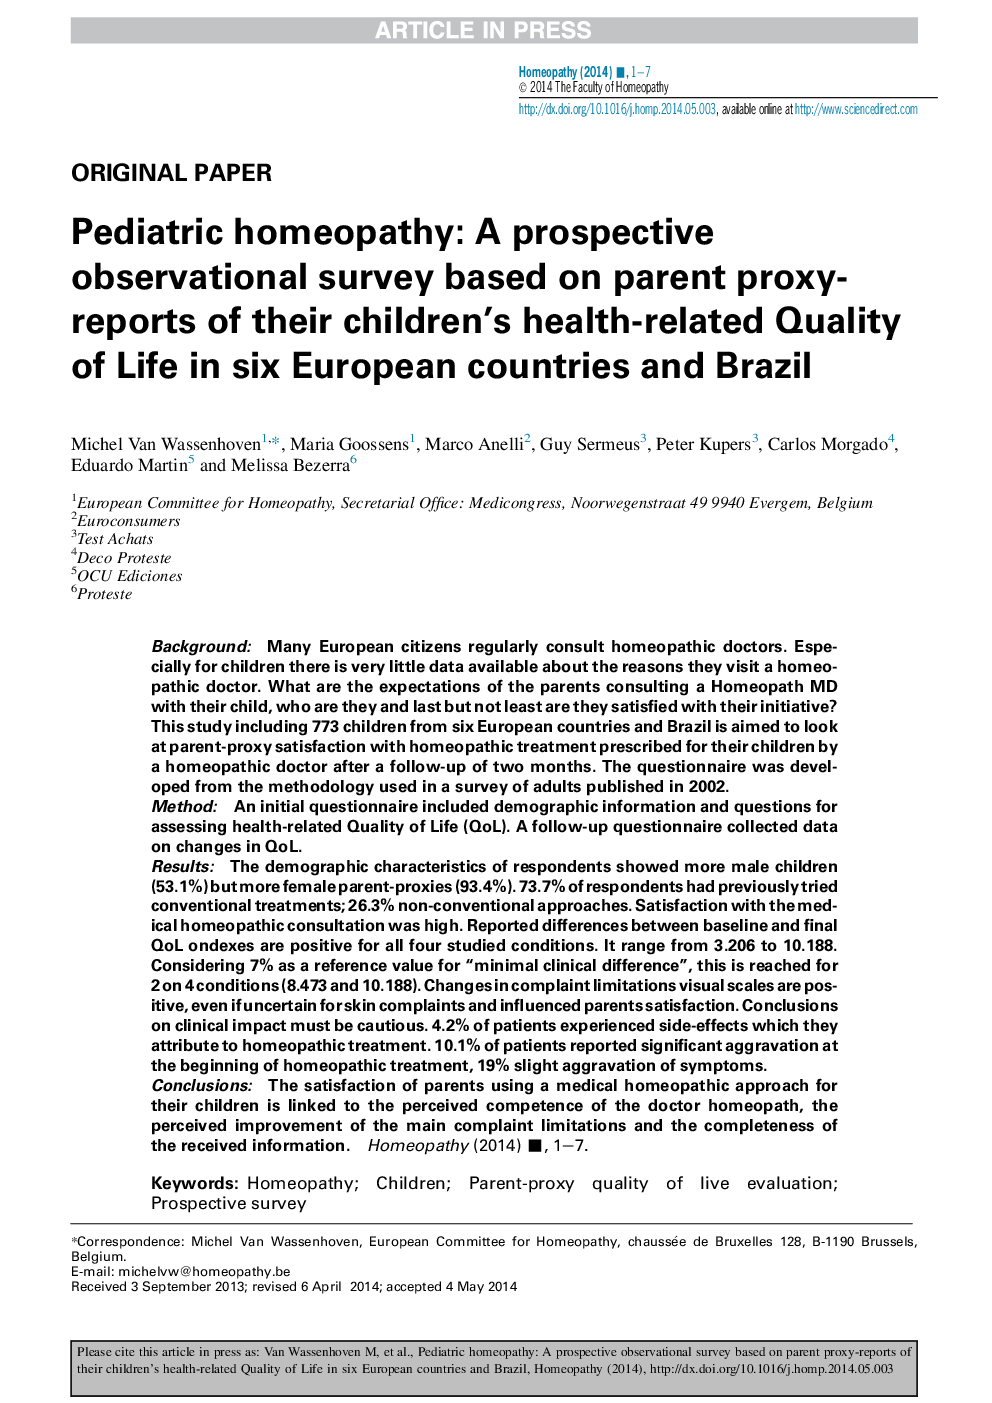 Pediatric homeopathy: A prospective observational survey based on parent proxy-reports of their children's health-related Quality of Life in six European countries and Brazil